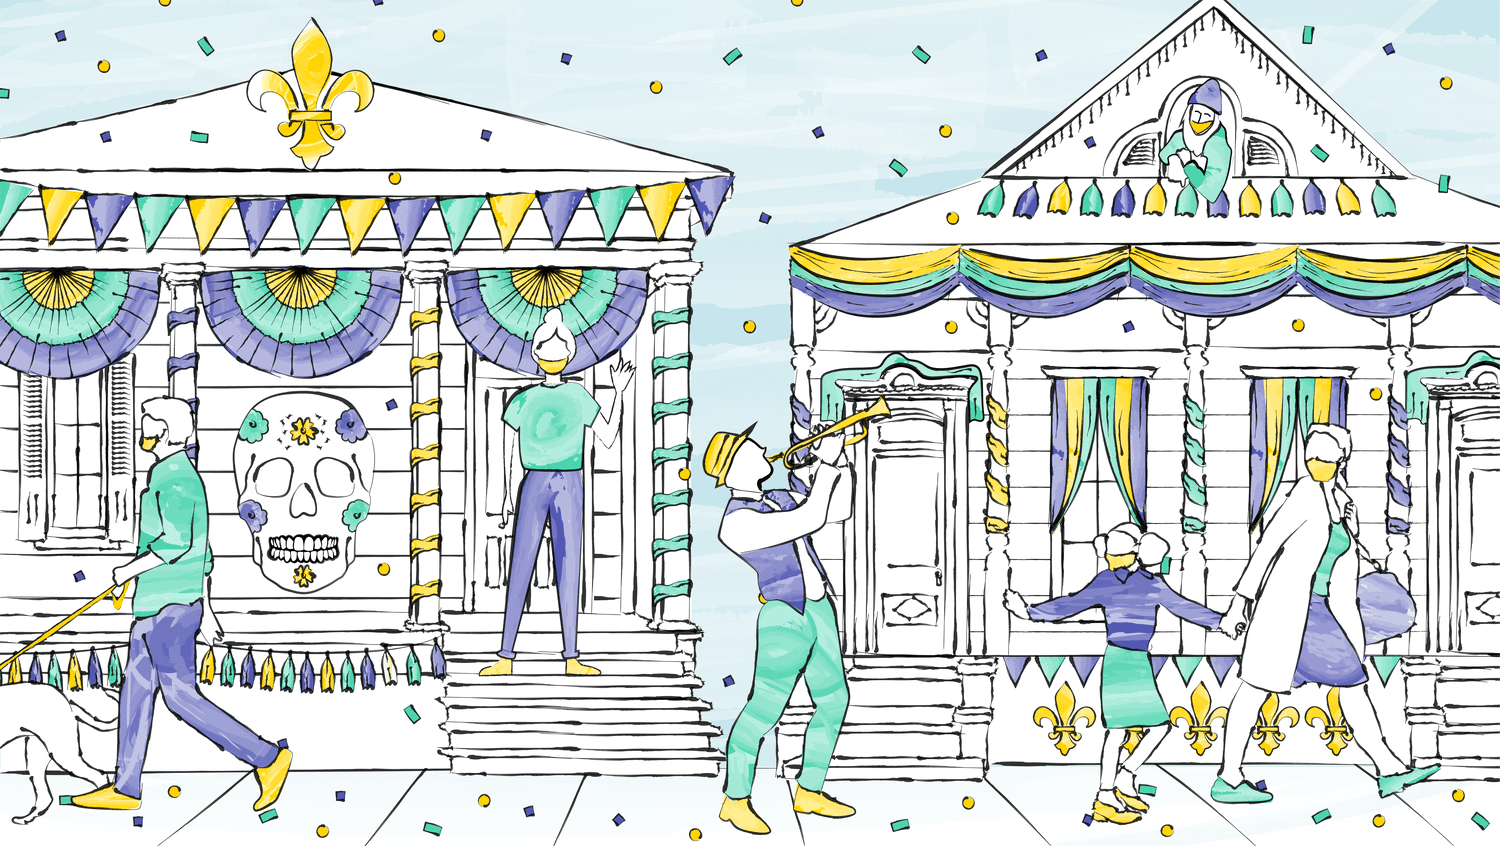 purple, green, and yellow illustration of people walking on a street at mardi gras